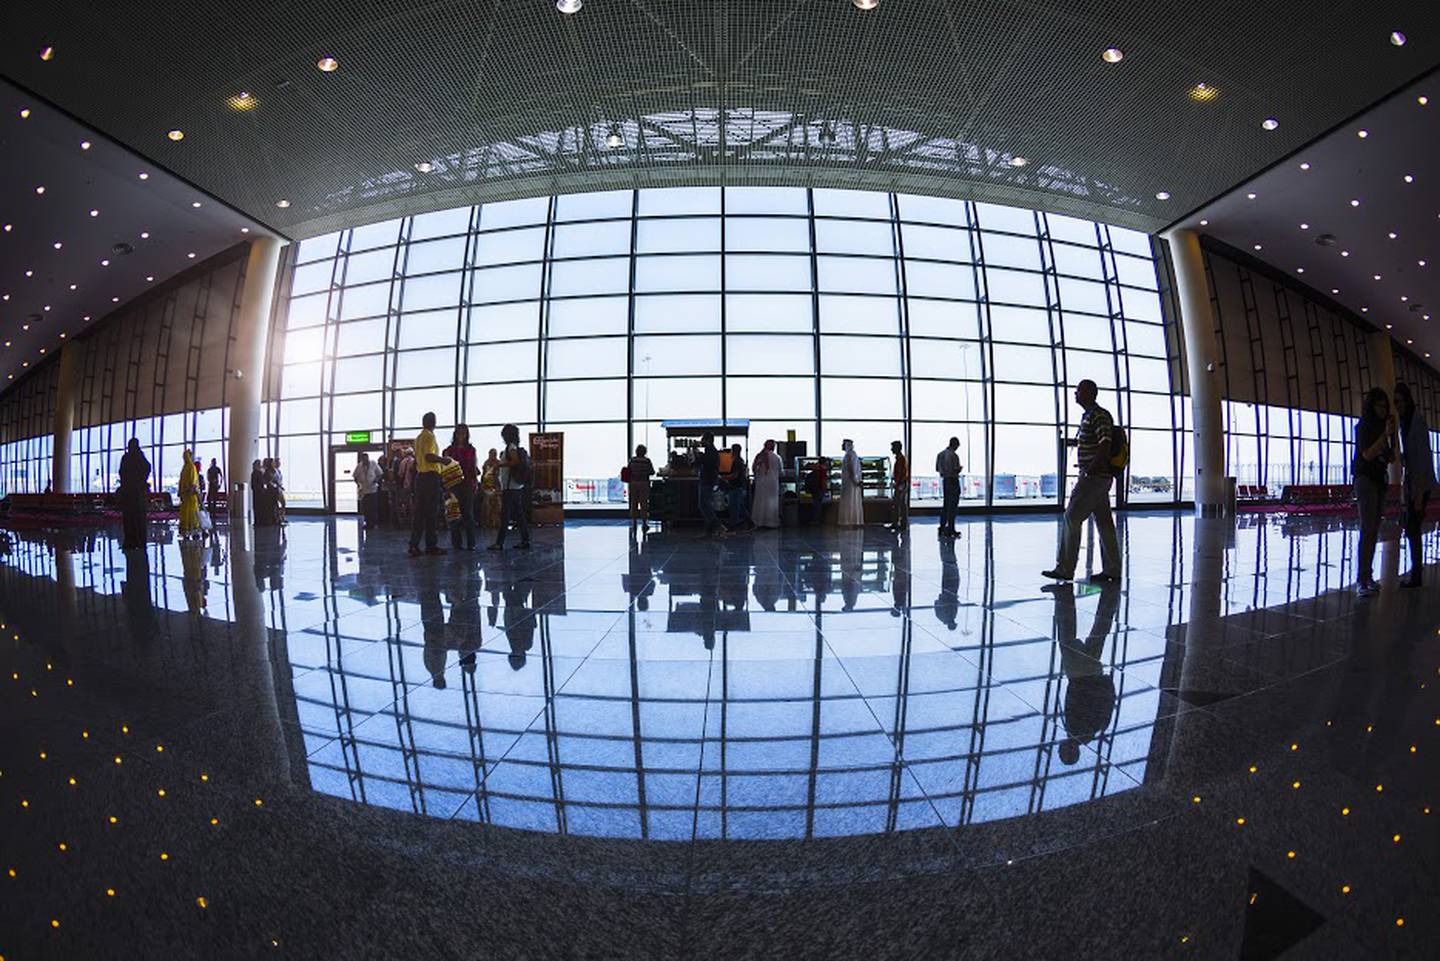 Dubai World Central will handle more than 1,000 flights per week from May 9 to June 22. Photo: Dubai Airports